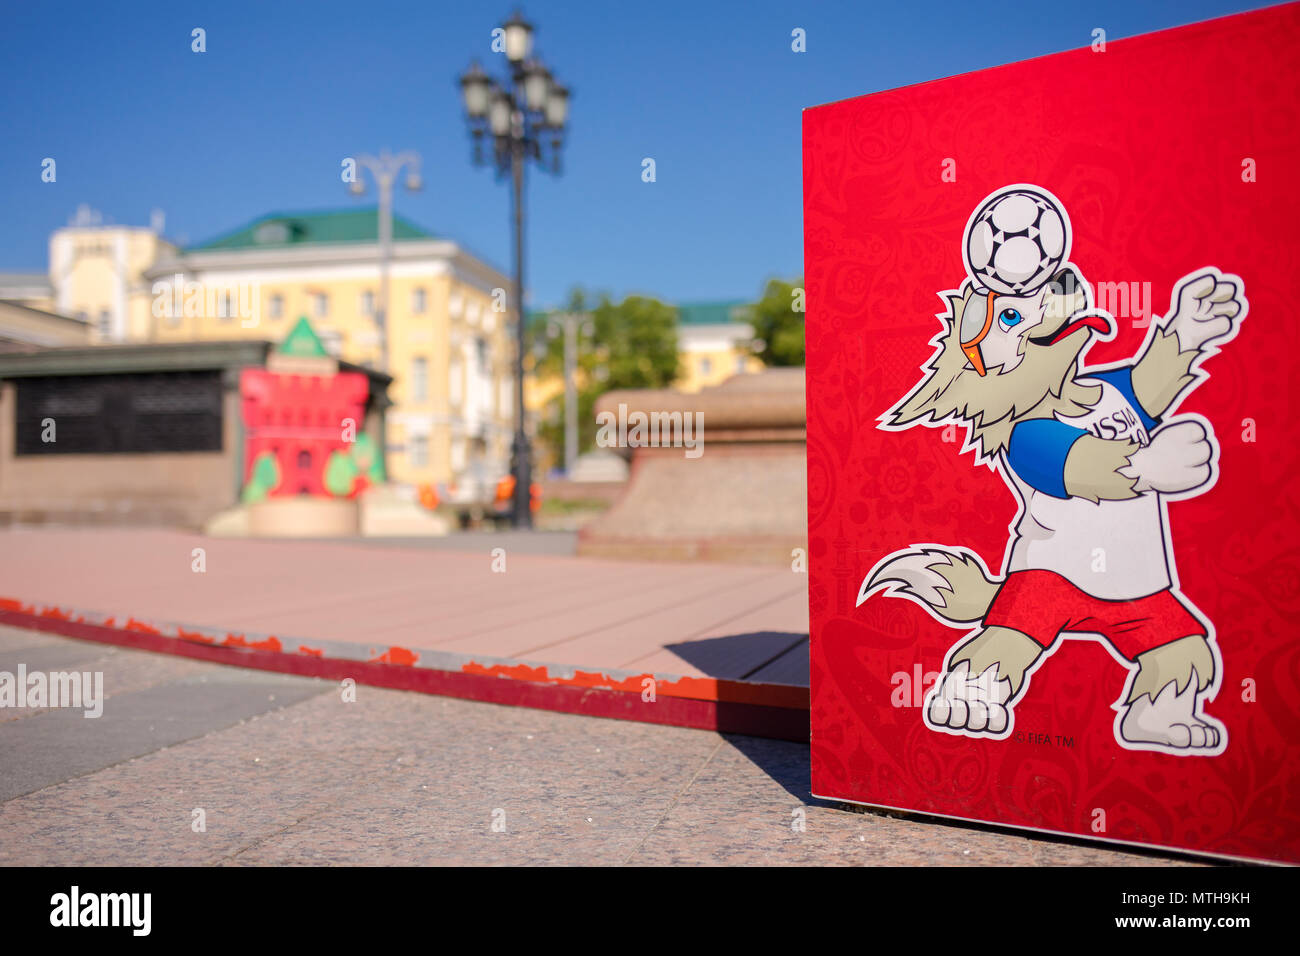 Official Mascot of FIFA 2018 World Cup in Russia - Zabivaka at installations of landmarks of cities participants of the FIFA World Cup 2018. Stock Photo